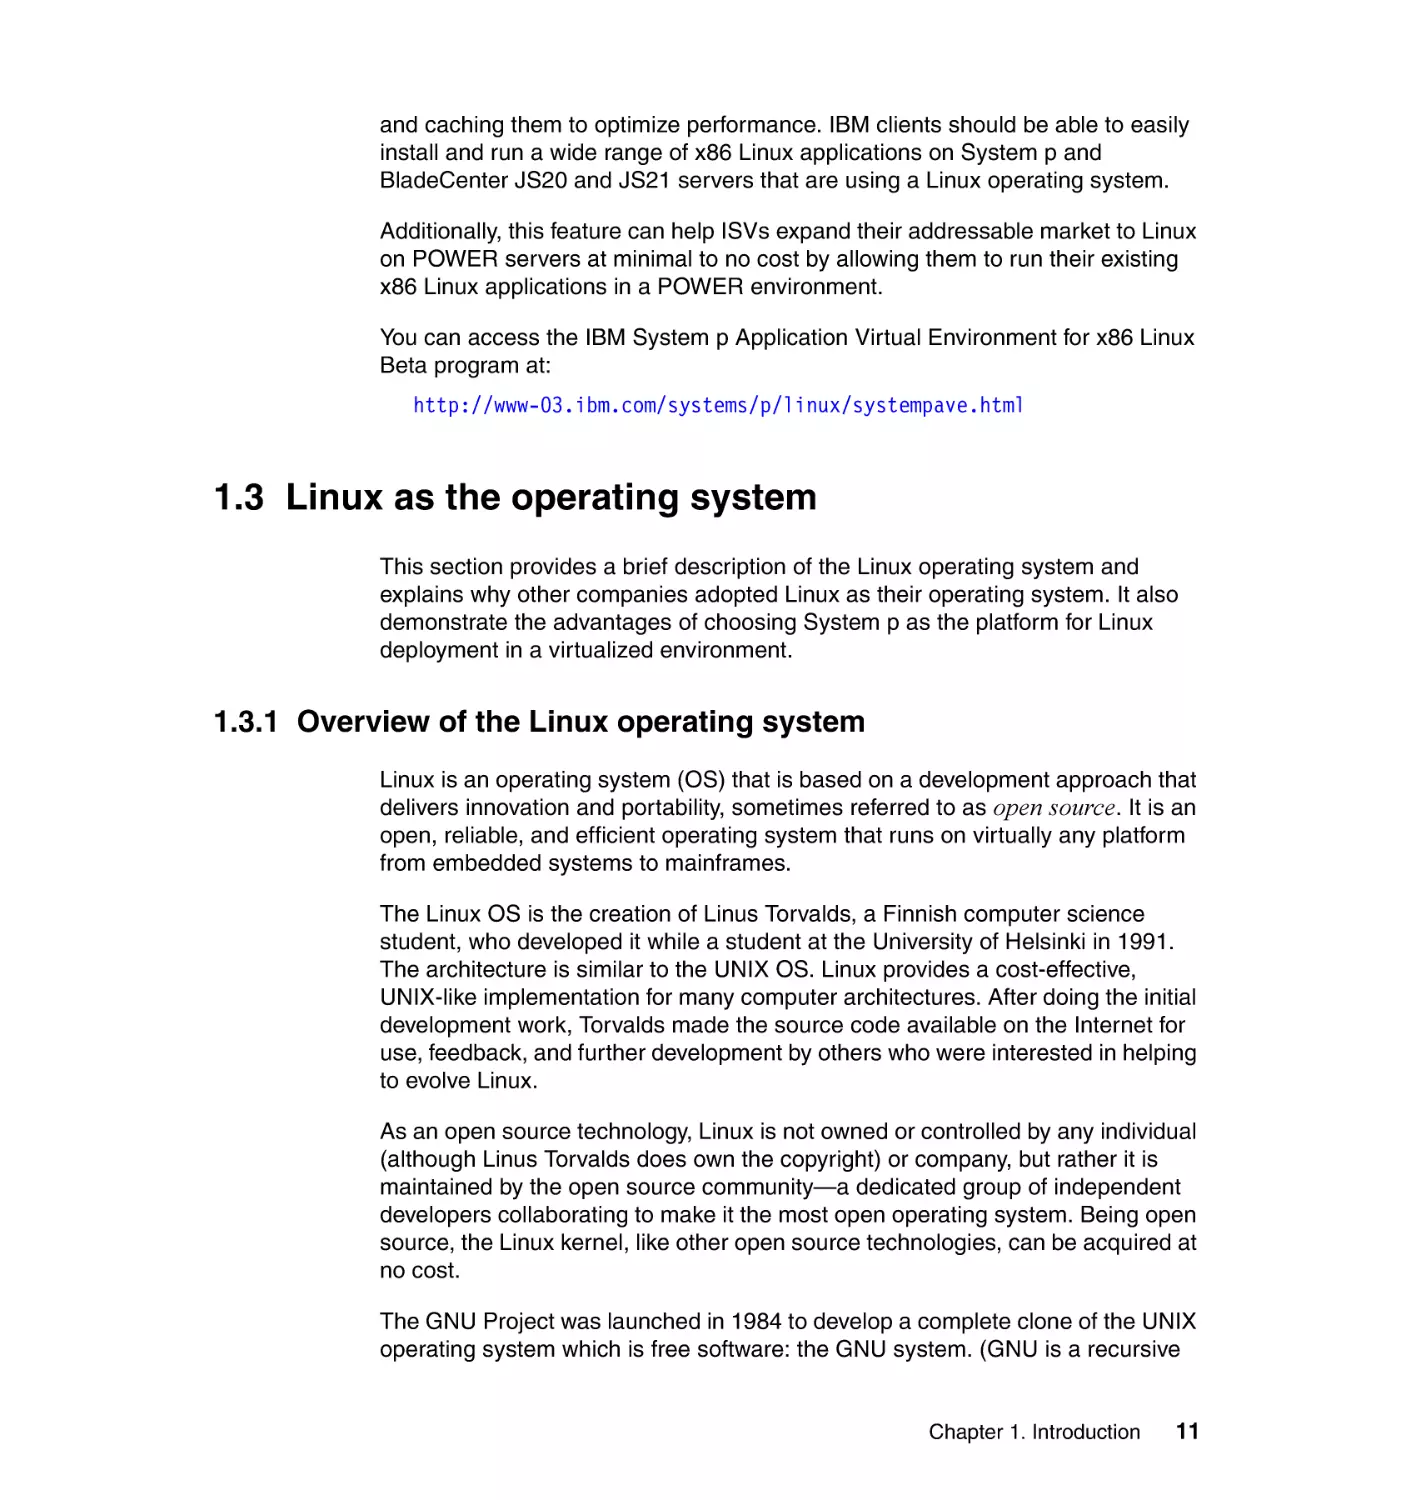 1.3 Linux as the operating system
1.3.1 Overview of the Linux operating system